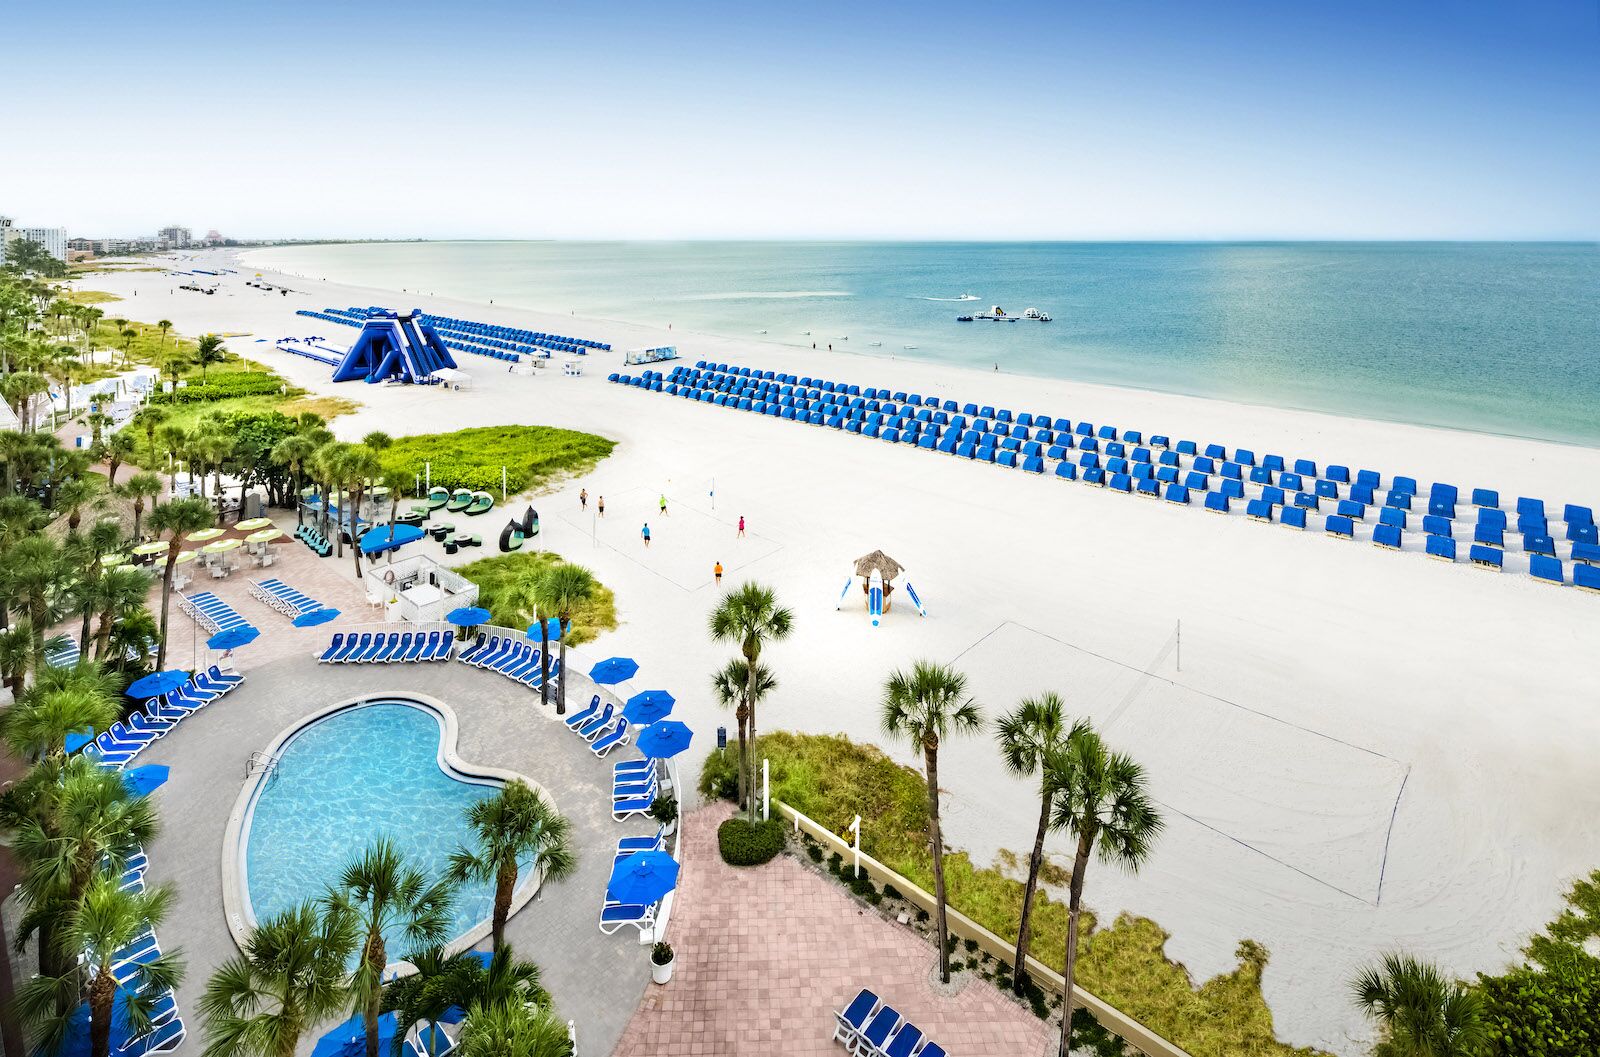 The Best AllInclusive Resorts in Florida for a WorryFree Beach